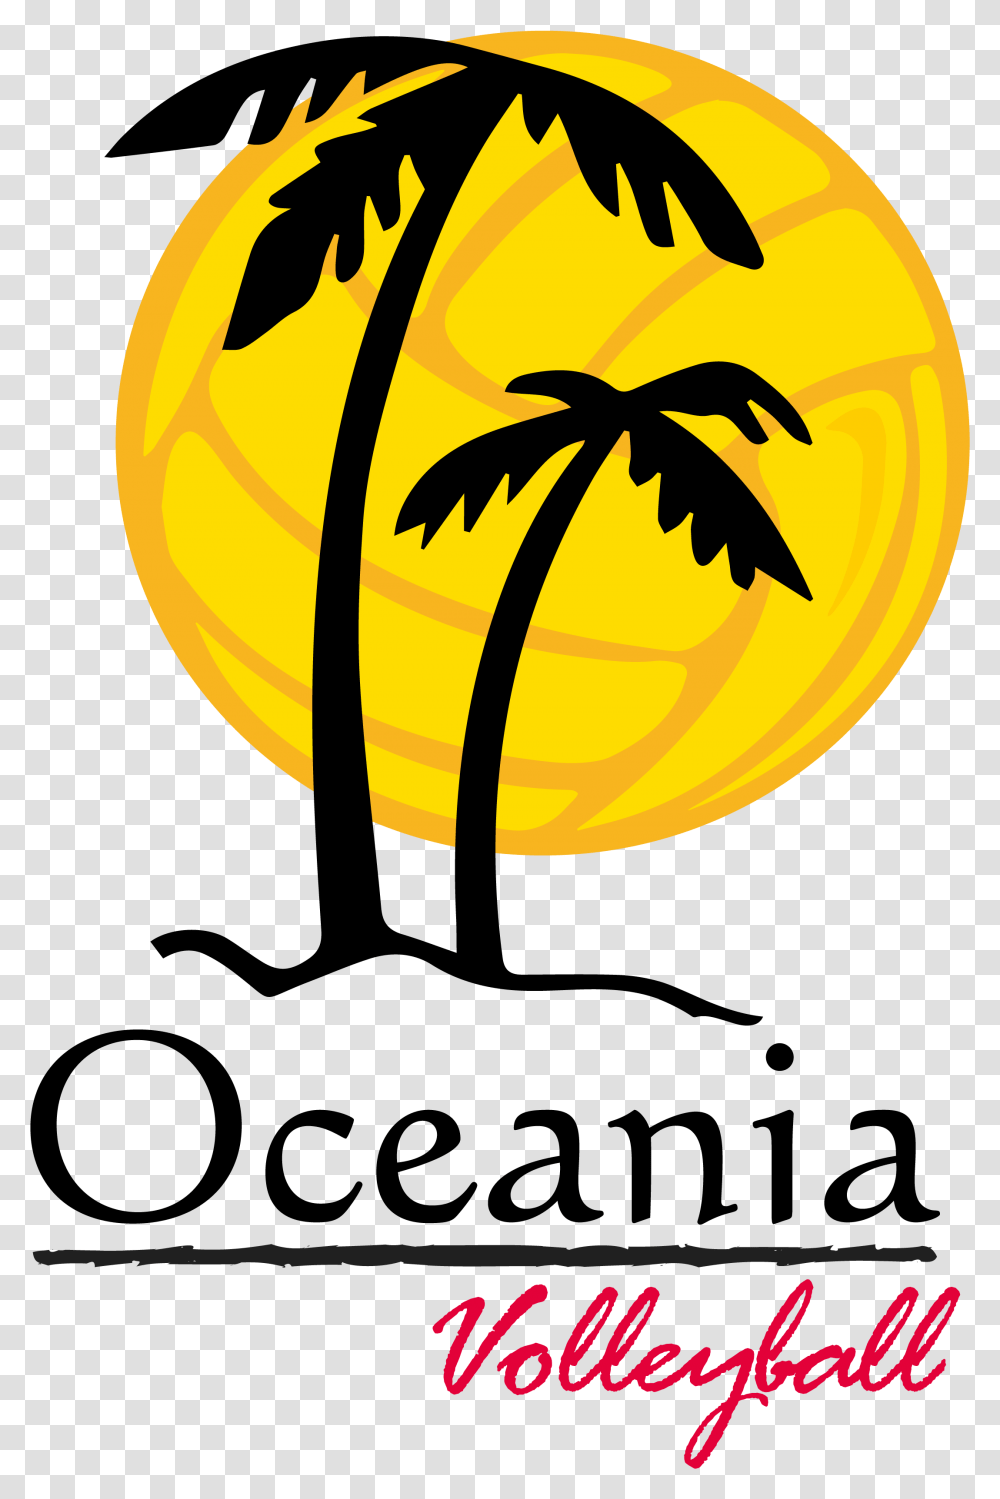 Home Oceania Volleyball Flamingo And Palm Tree Clip Art, Astronomy, Halloween, Sphere, Outer Space Transparent Png